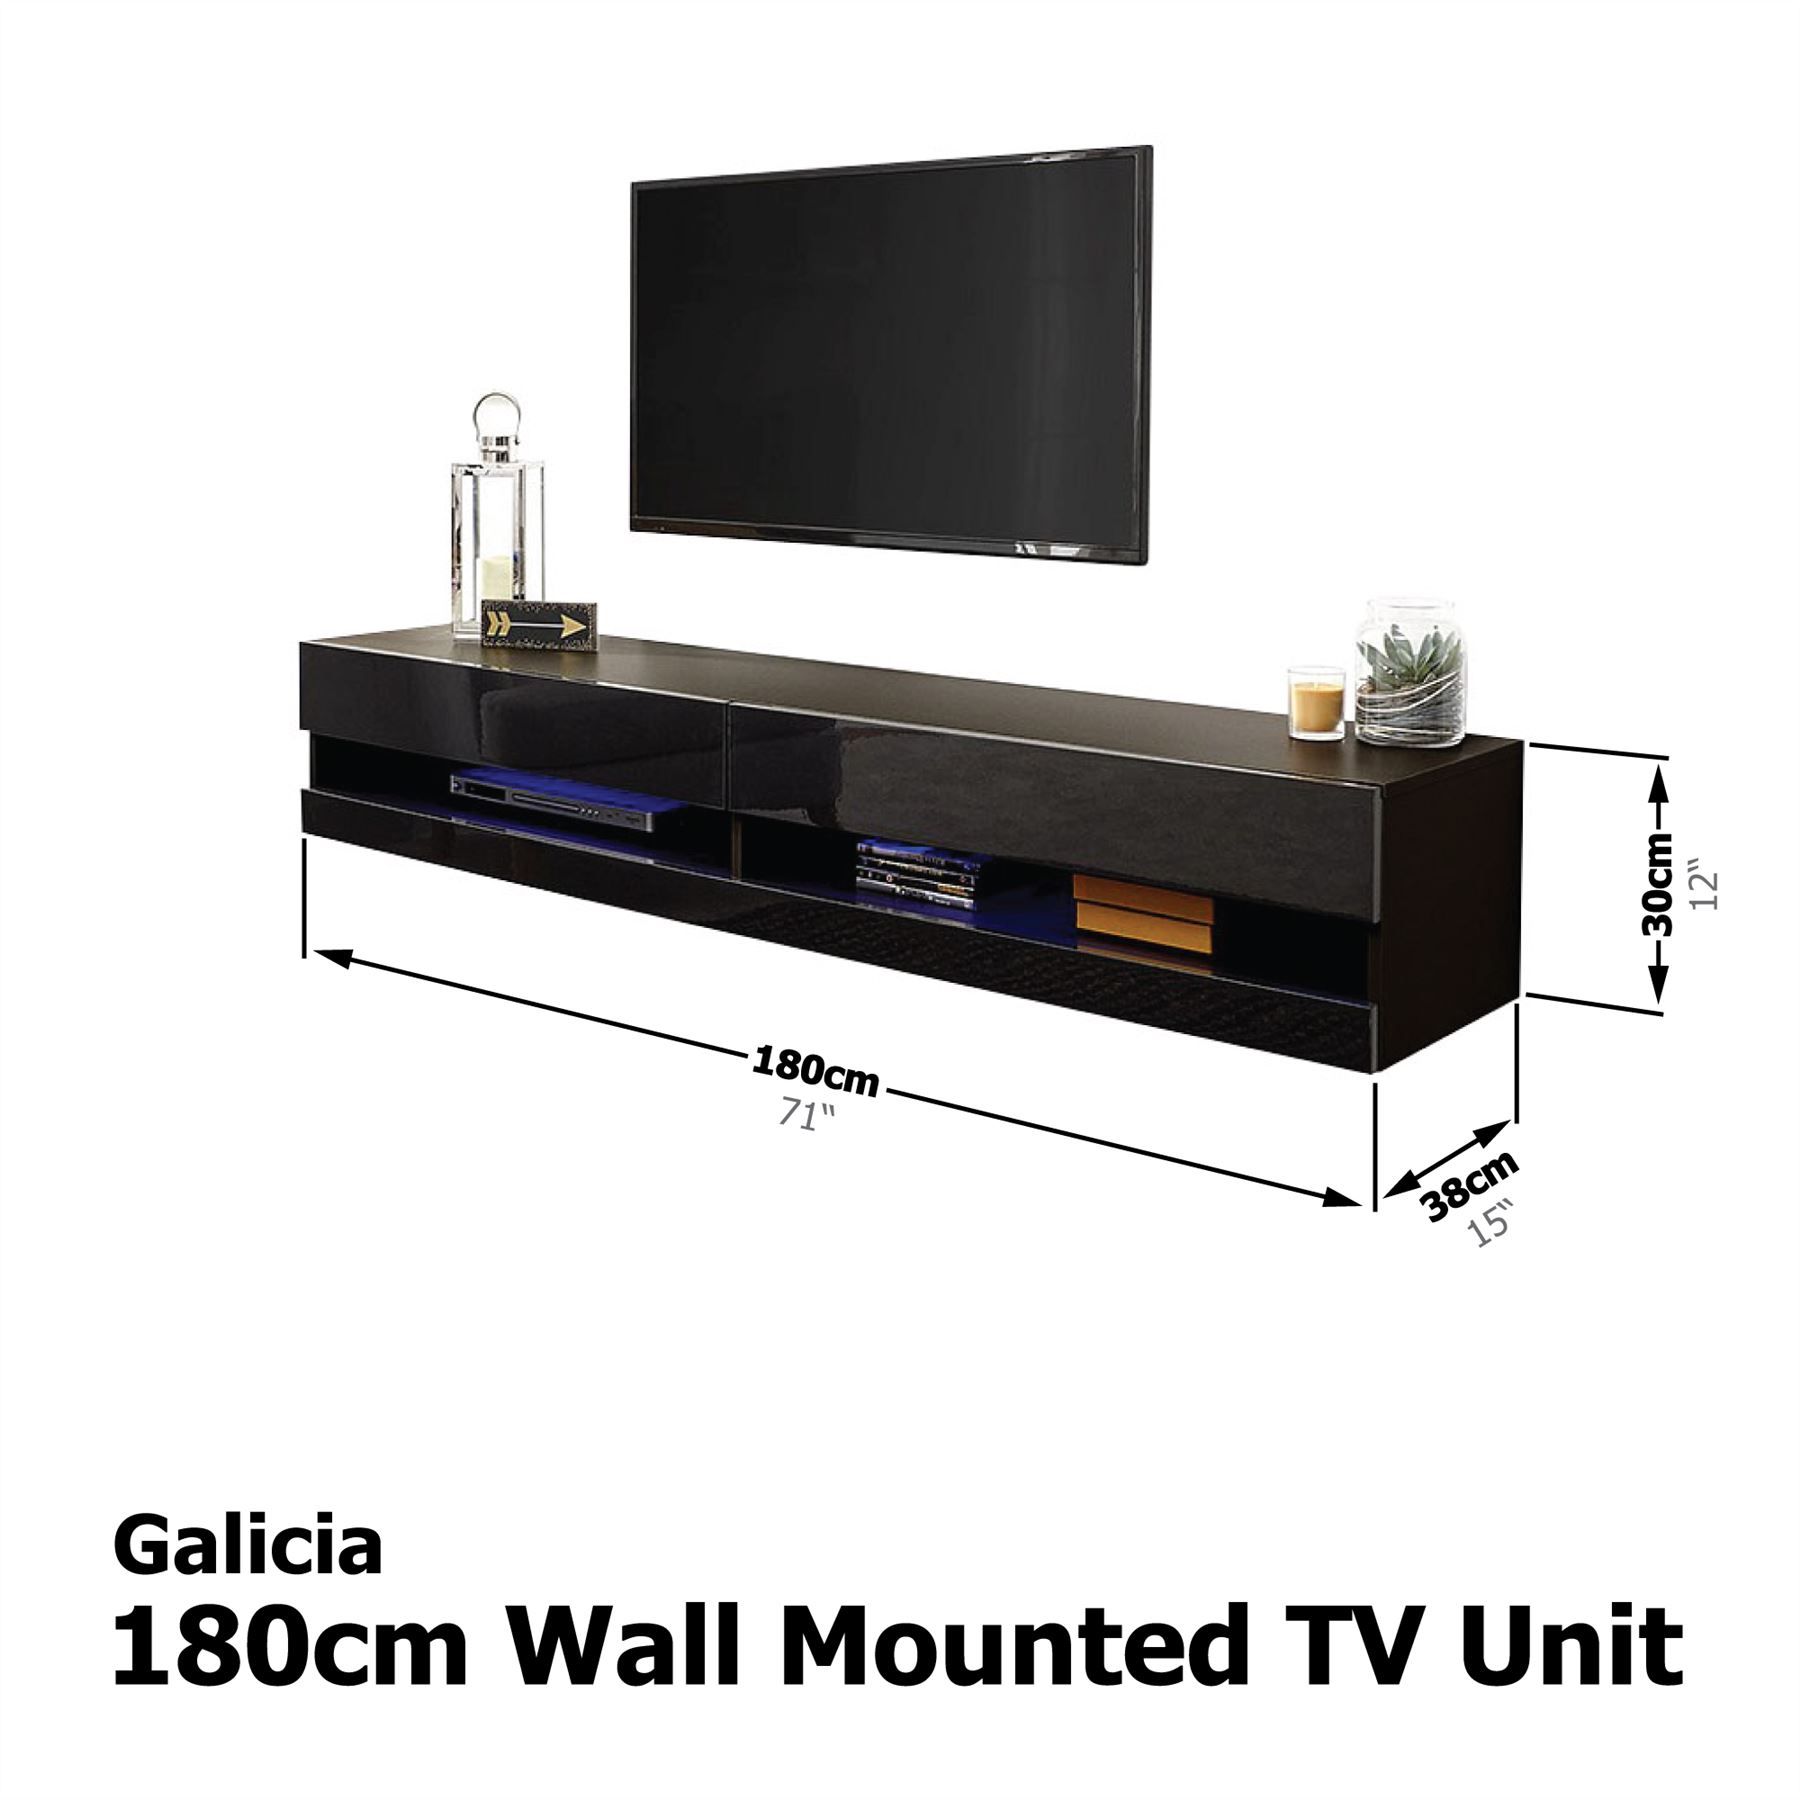 Galicia 120cm 150cm 180cm Wall Tv Unit Stand W/ Led Lcd Intended For Galicia 180cm Led Wide Wall Tv Unit Stands (View 4 of 15)